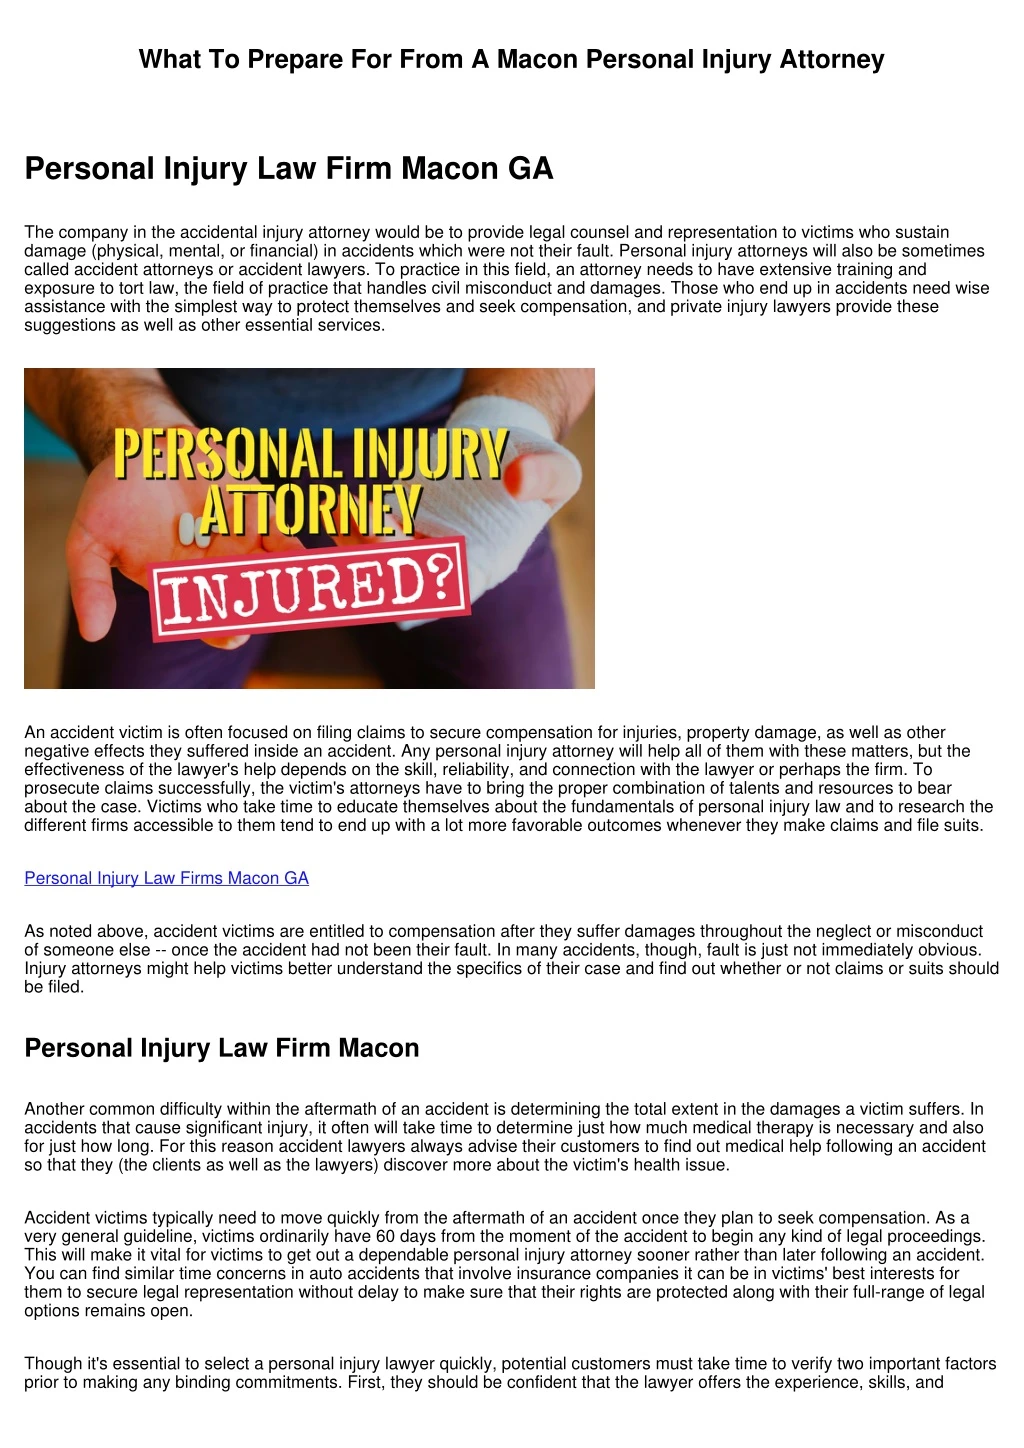 what to prepare for from a macon personal injury